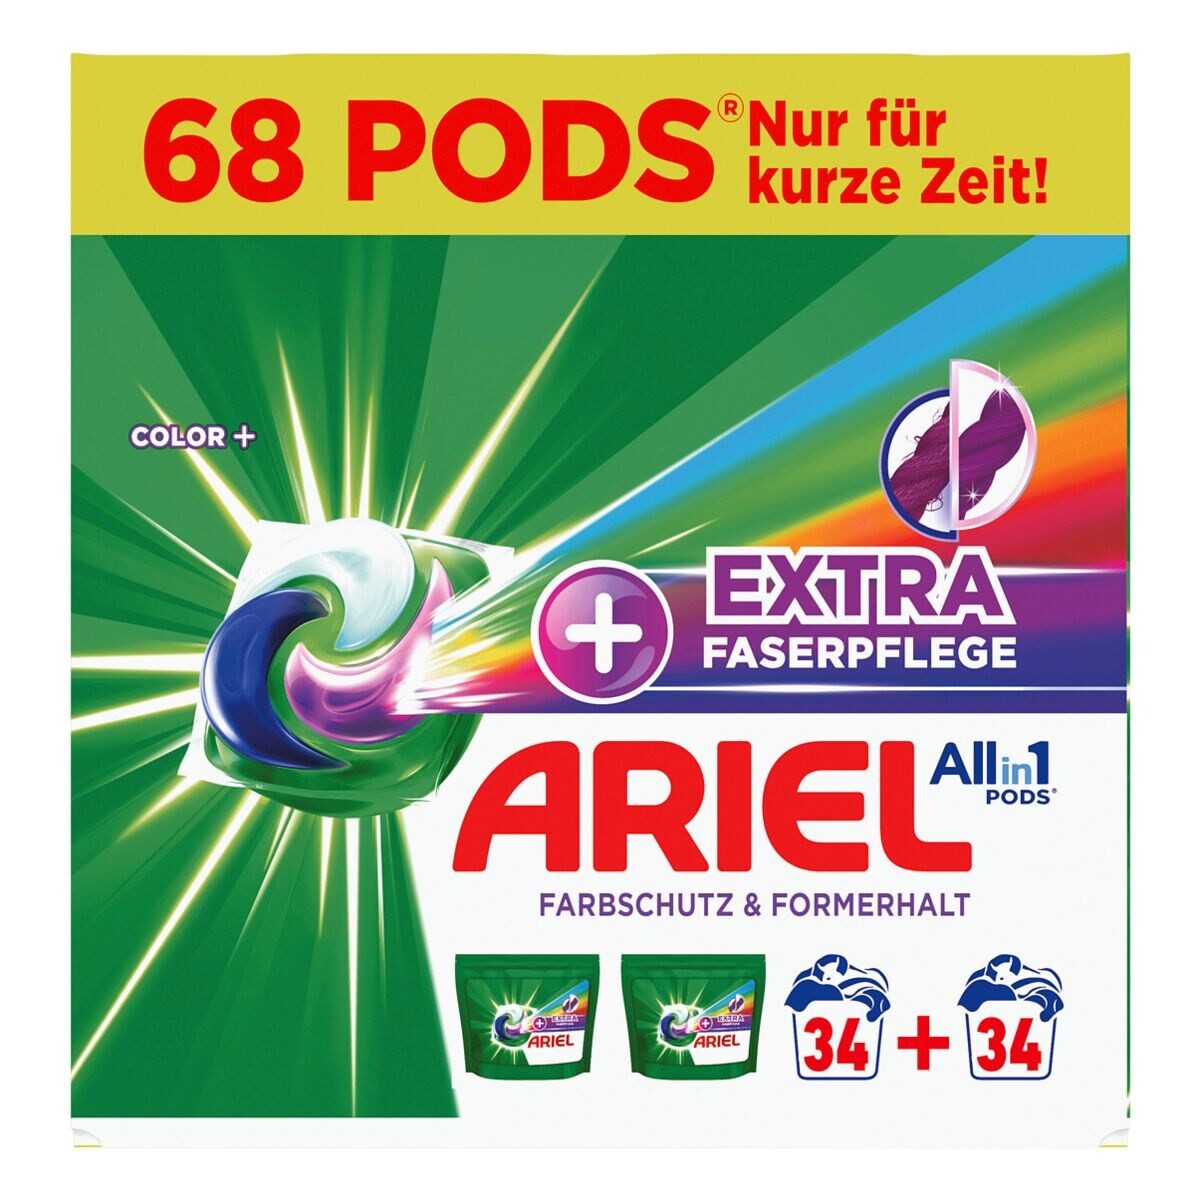 ARIEL All-in-1 COLOR+ Extra Faserpflege Colorwaschmittel (68 WL, 2x 34 Pods)